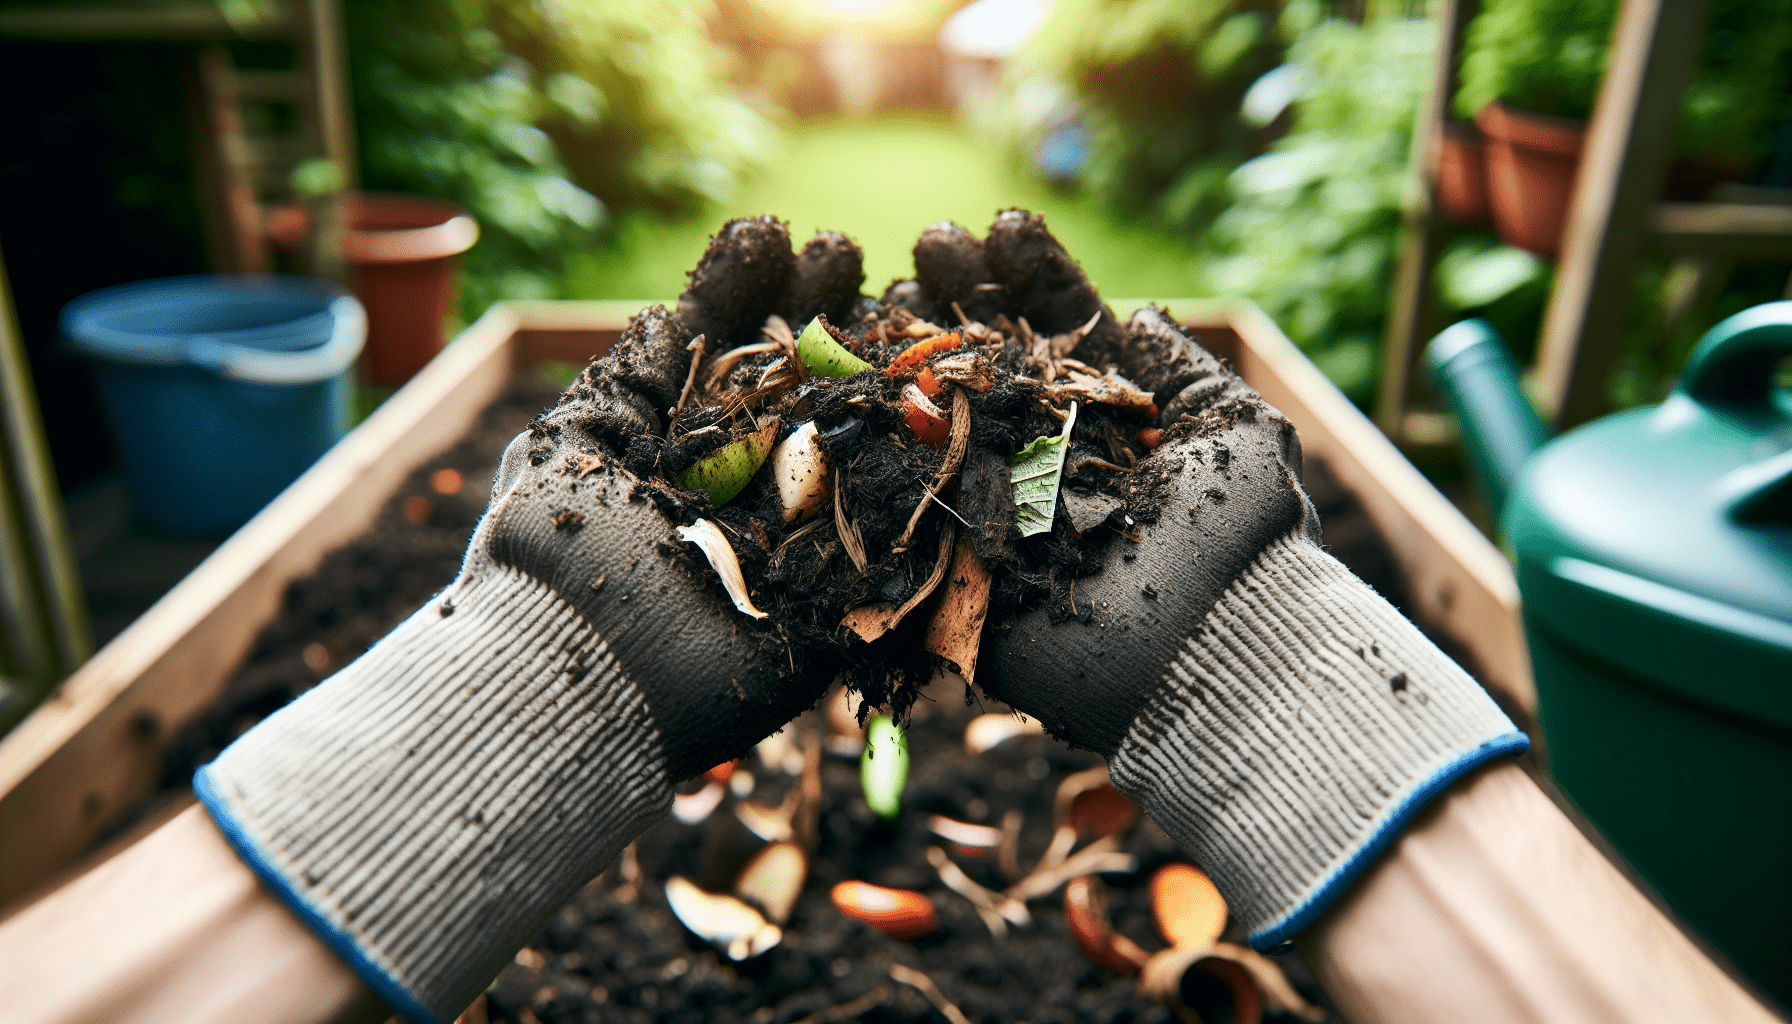 How Can I Speed Up The Composting Process?